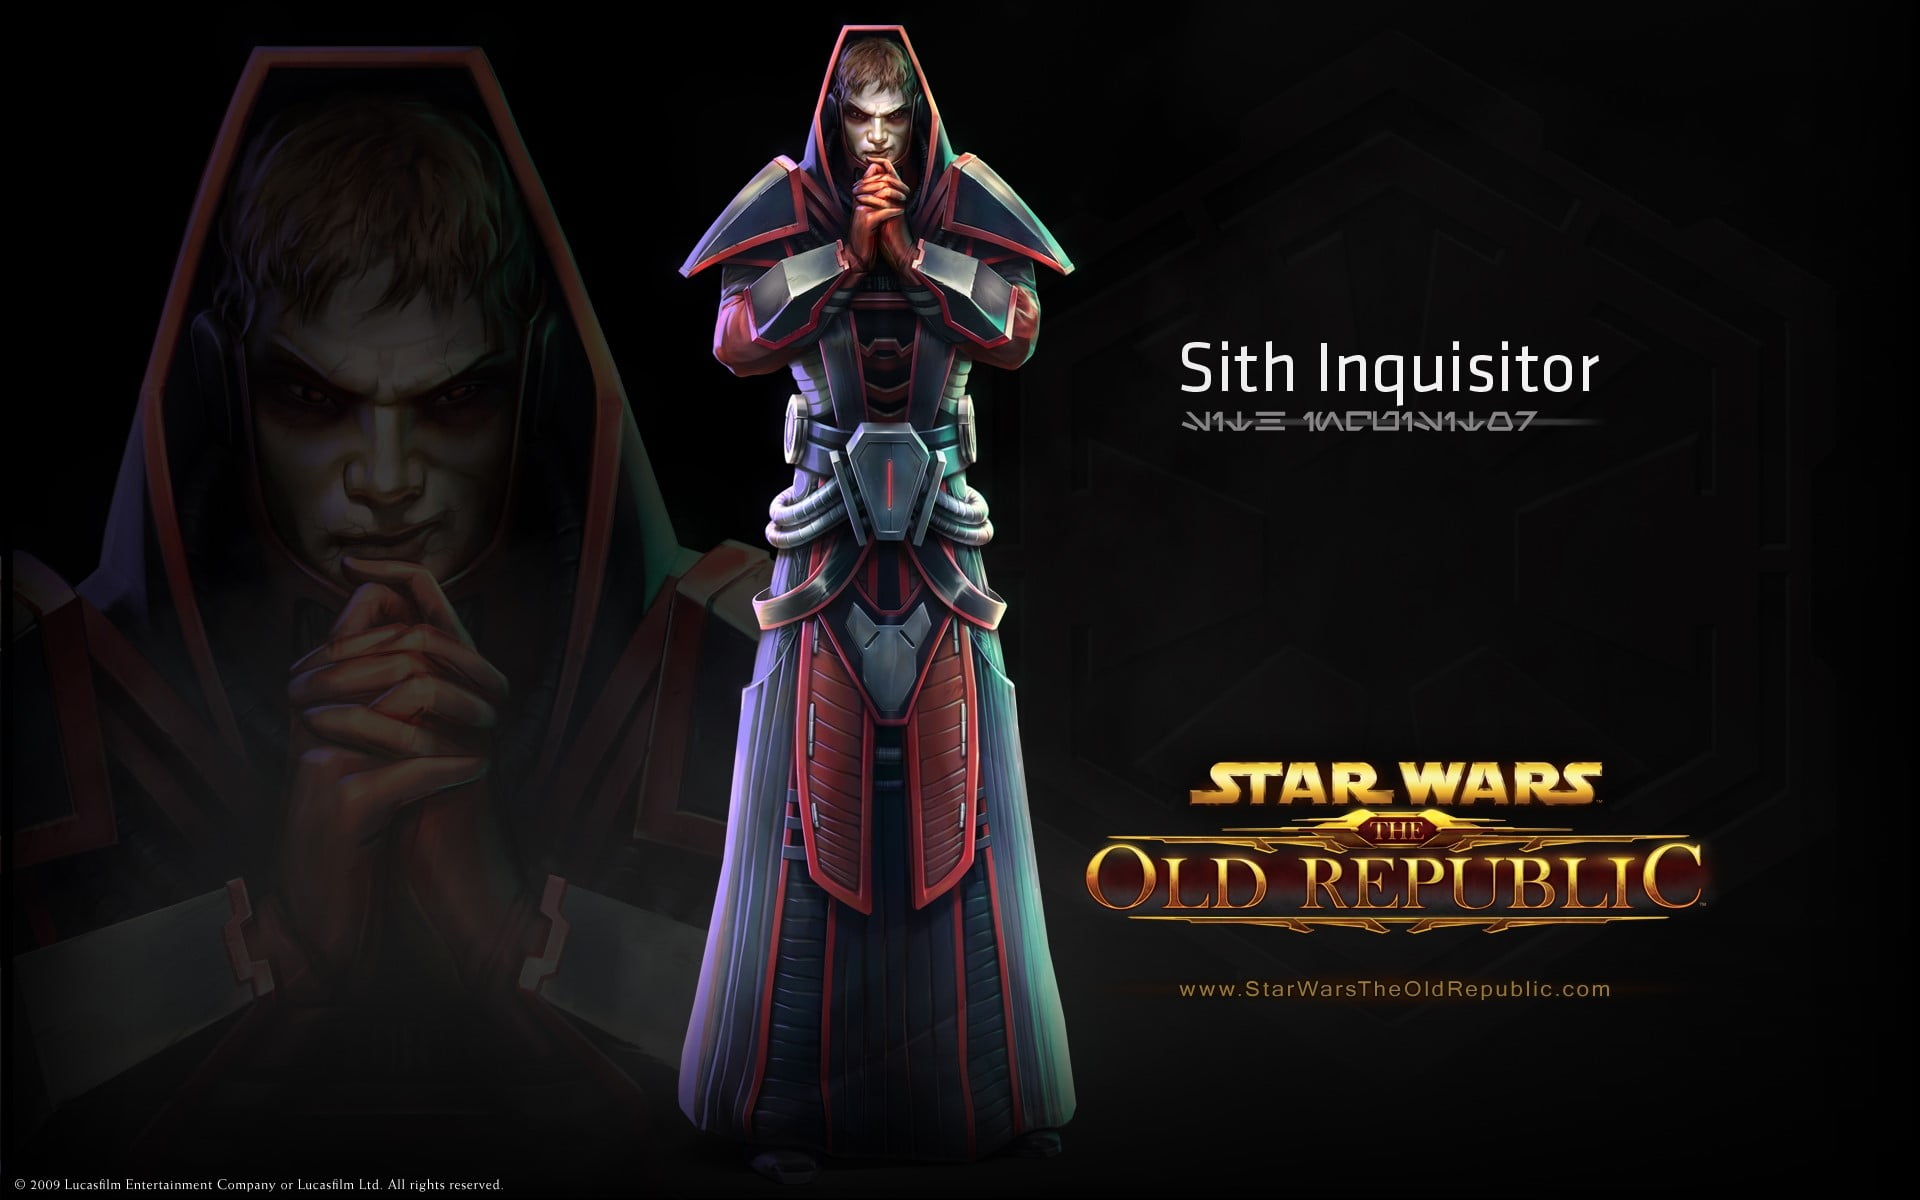 Star wars the old republic, Sith inquisitor, Character, Costume